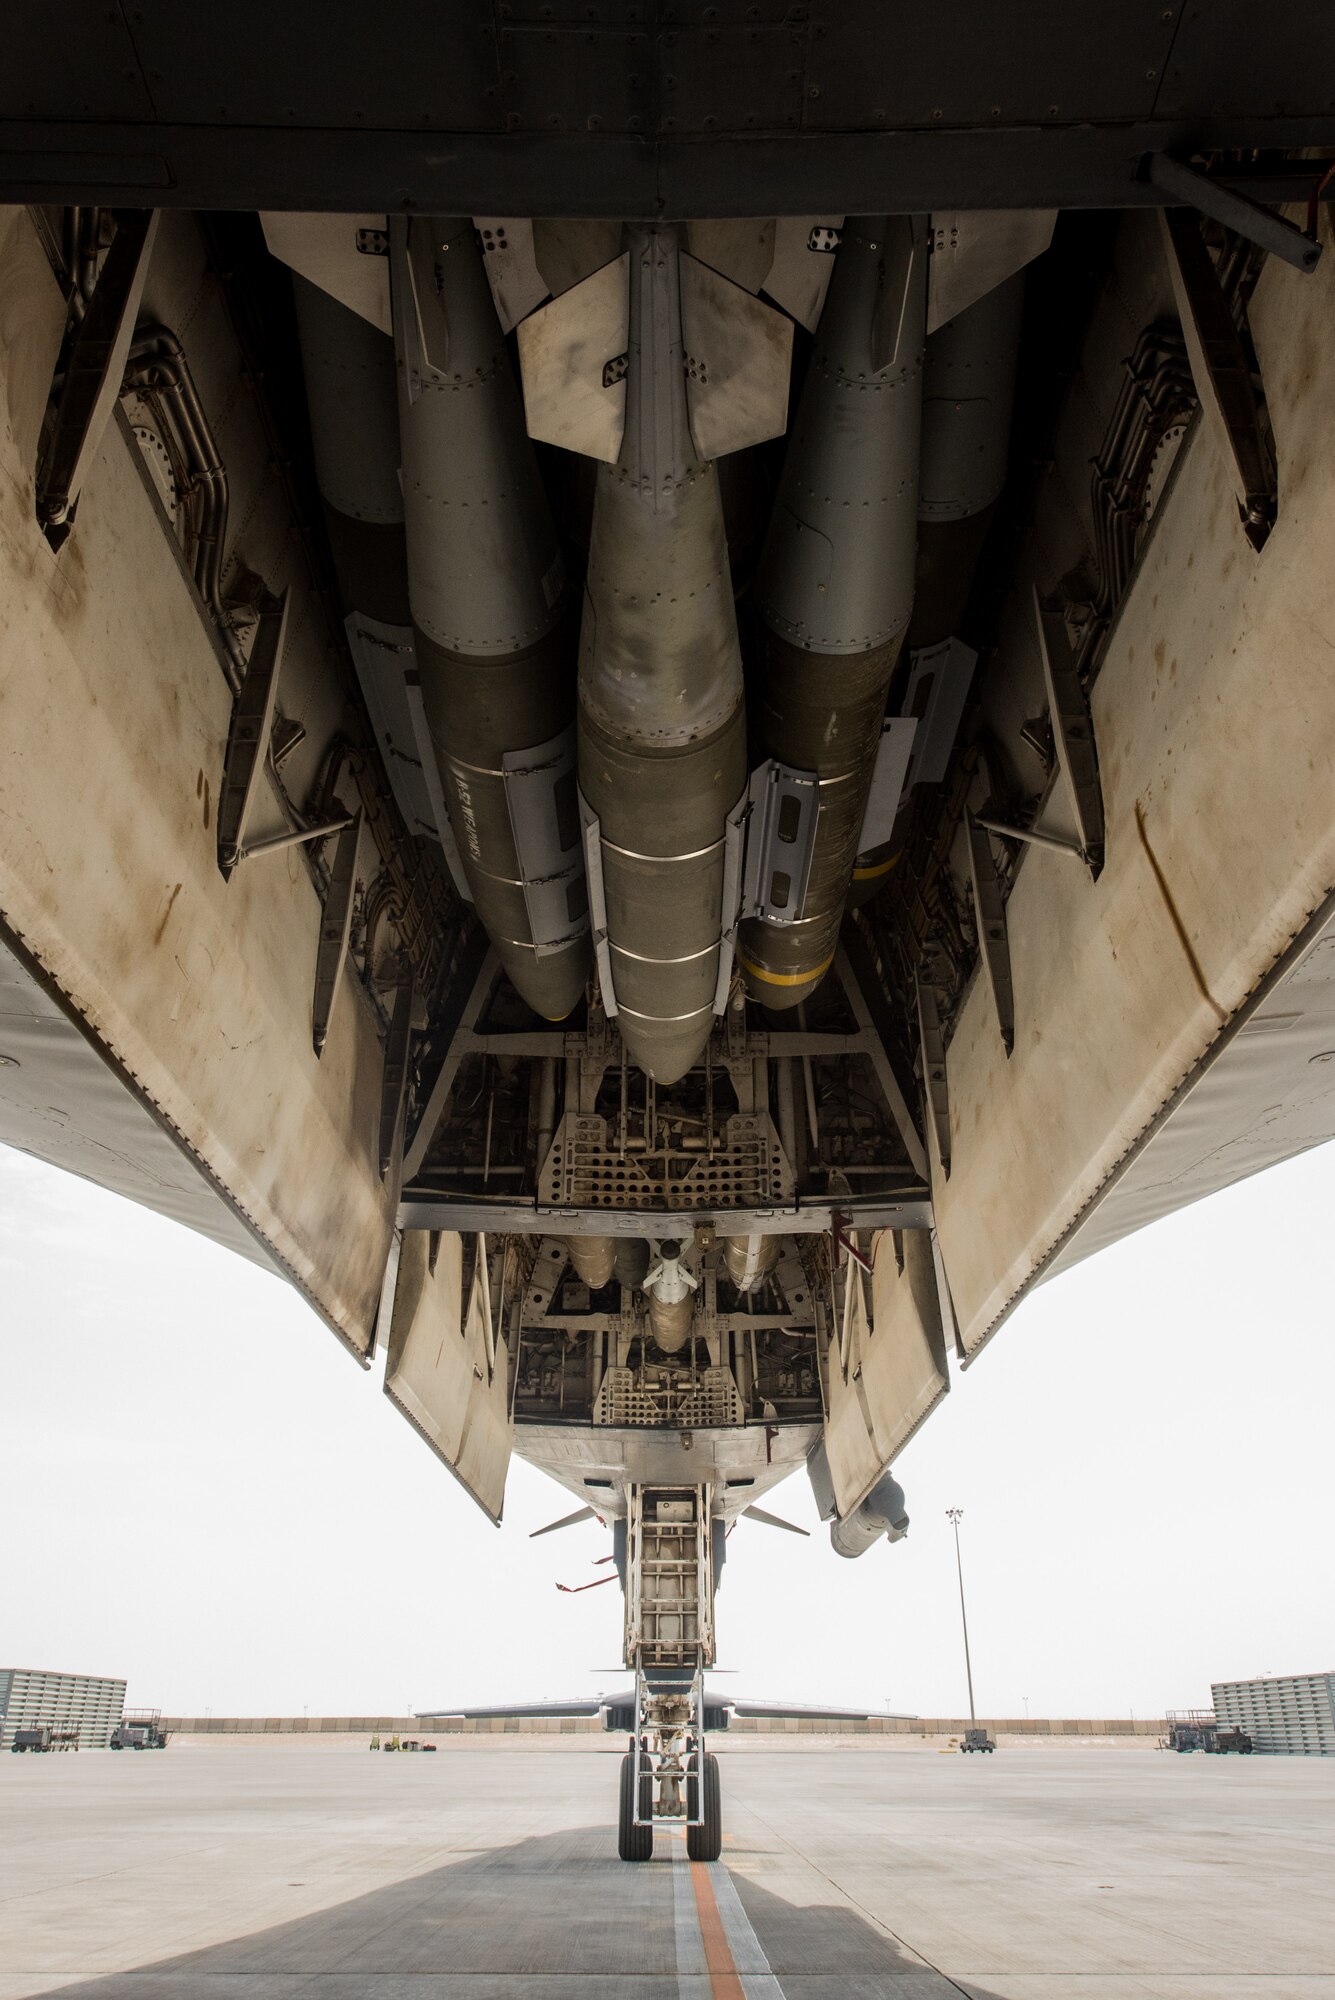 A 34th Expeditionary Bomb Squadron B-1B Lancer is prepared for departure at Al Udeid Air Base, Qatar, May 19, 2018. The reputable B-1 returned to the area of operations in April to combat Taliban and other terrorist groups after two years of supporting the United States Pacific Command’s AOR. (U.S. Air Force photo by Staff Sgt. Joshua Horton)